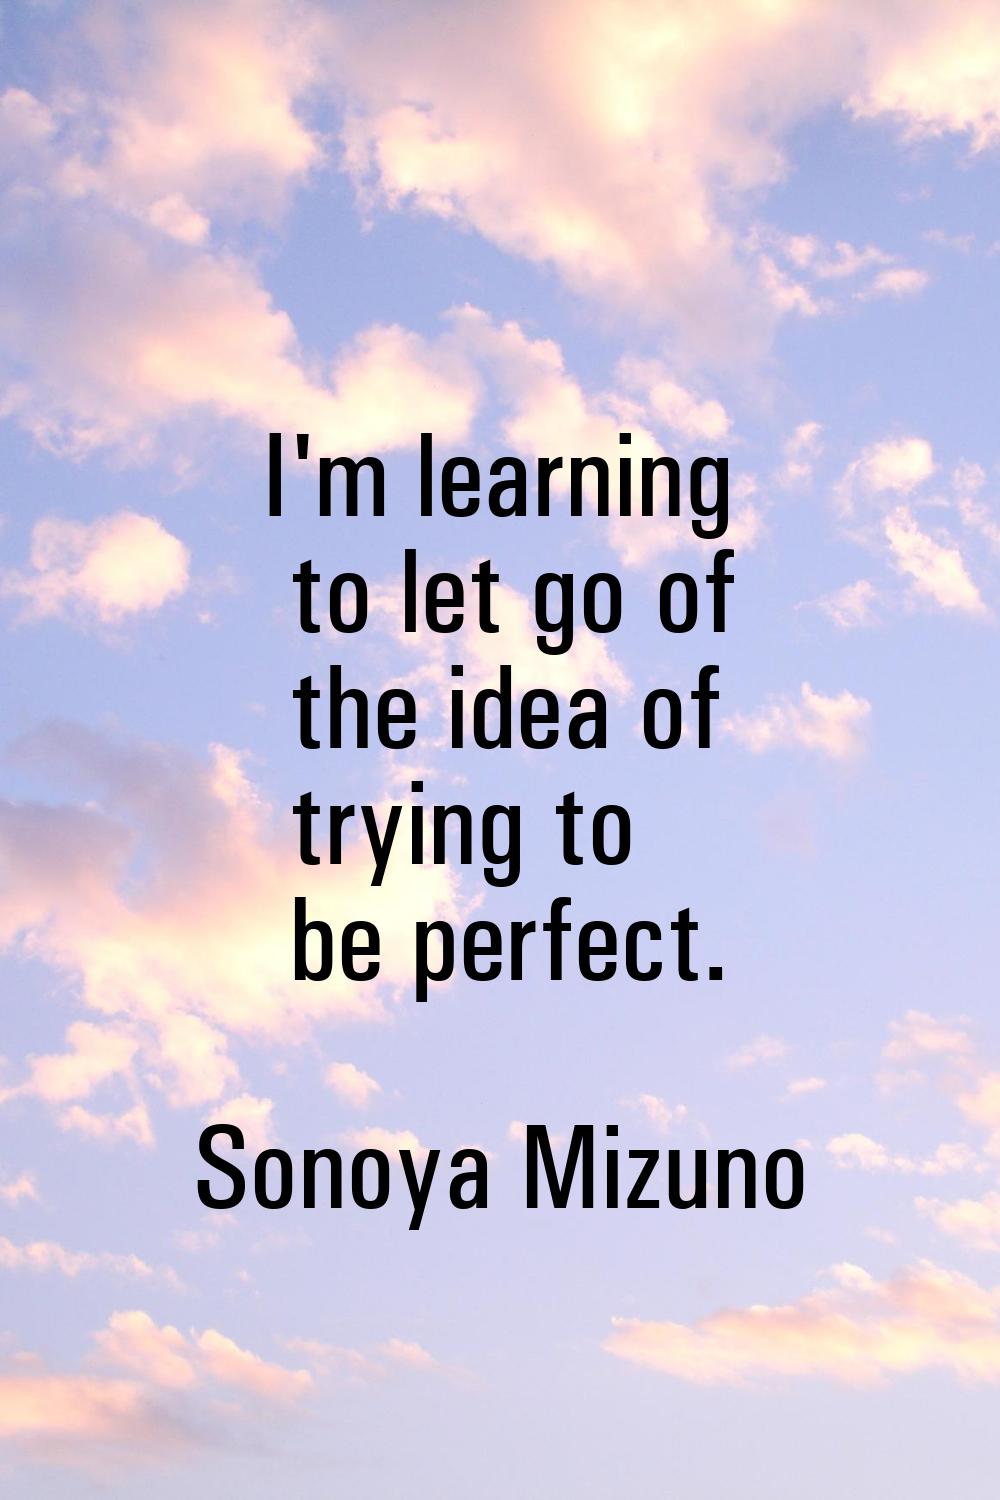 I'm learning to let go of the idea of trying to be perfect.